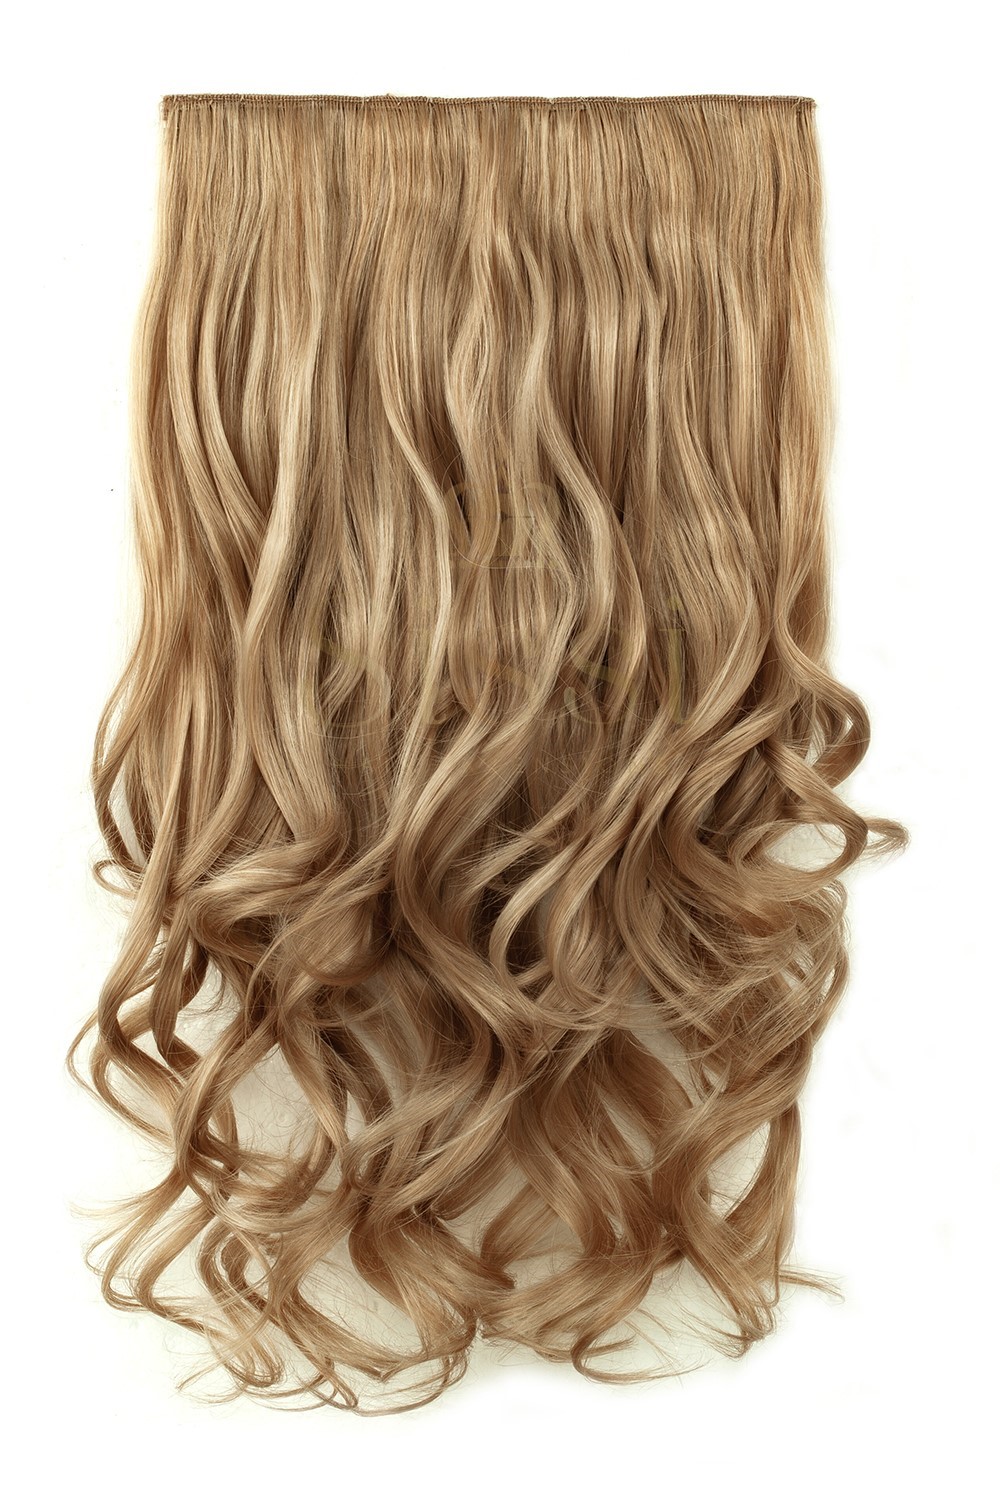 Deluxe Chloe 20" 1 Piece Curly Clip In Hair Extension  